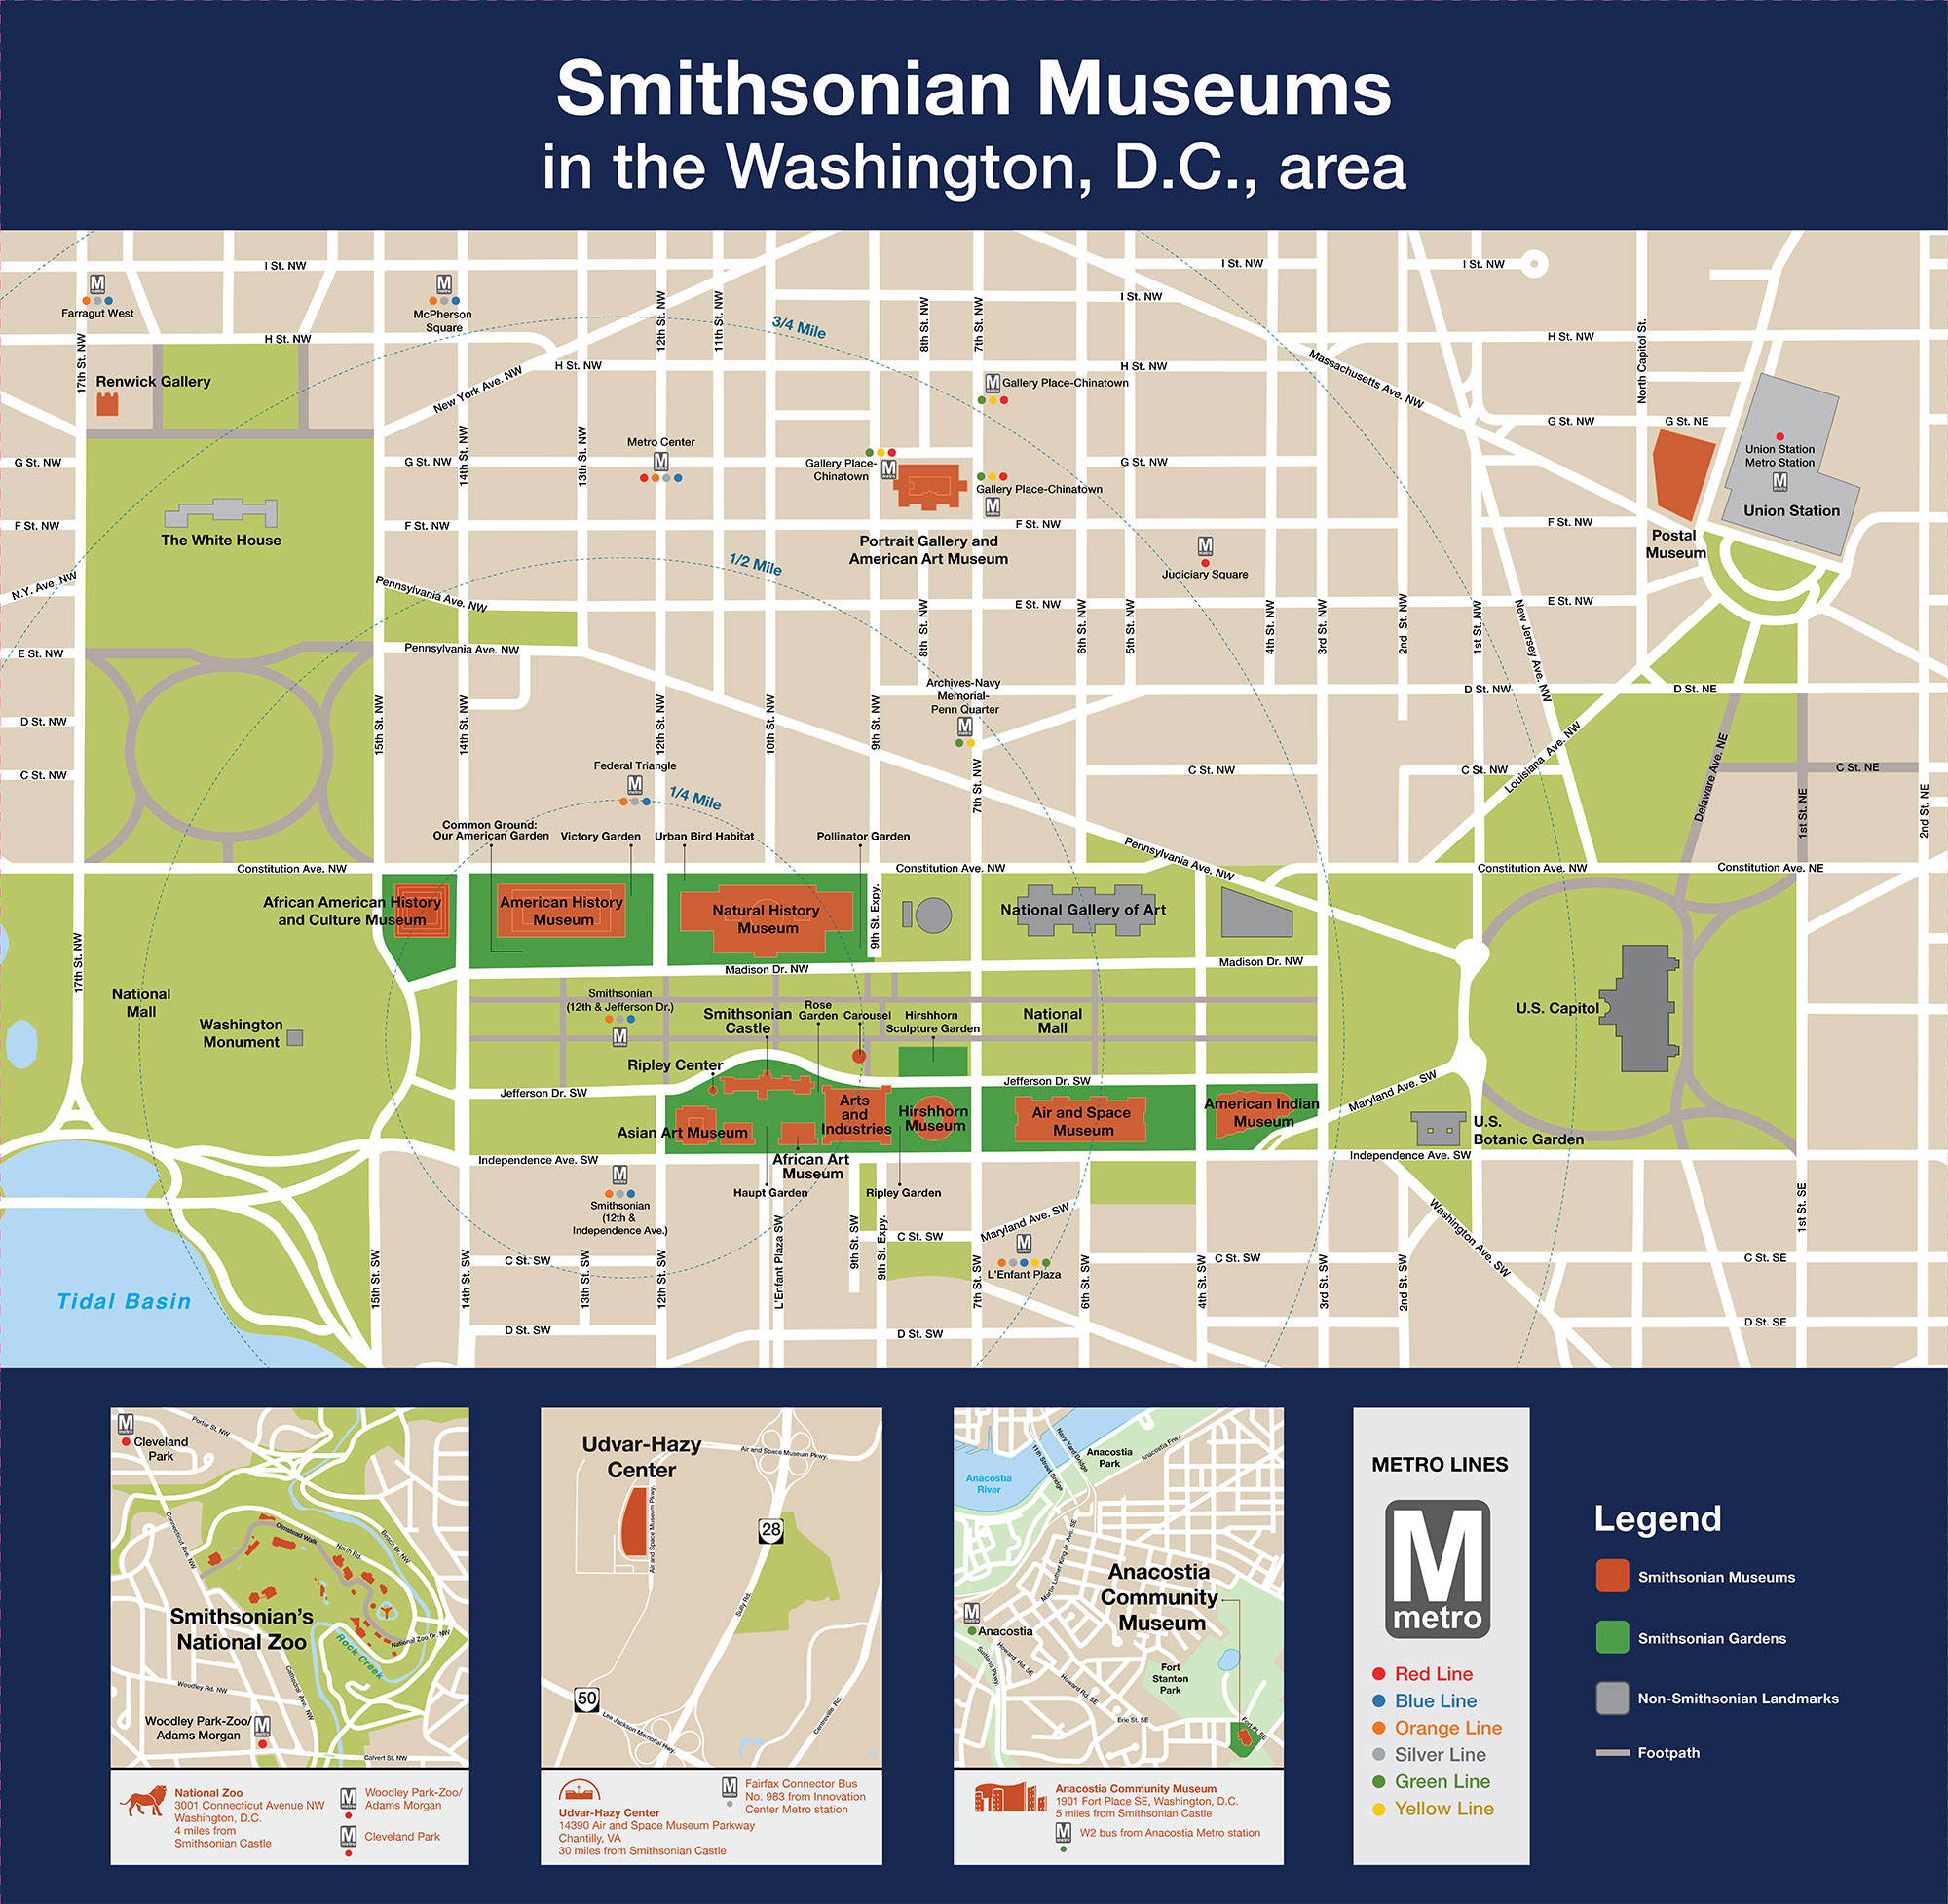 Map of the National Mall showing location of museums